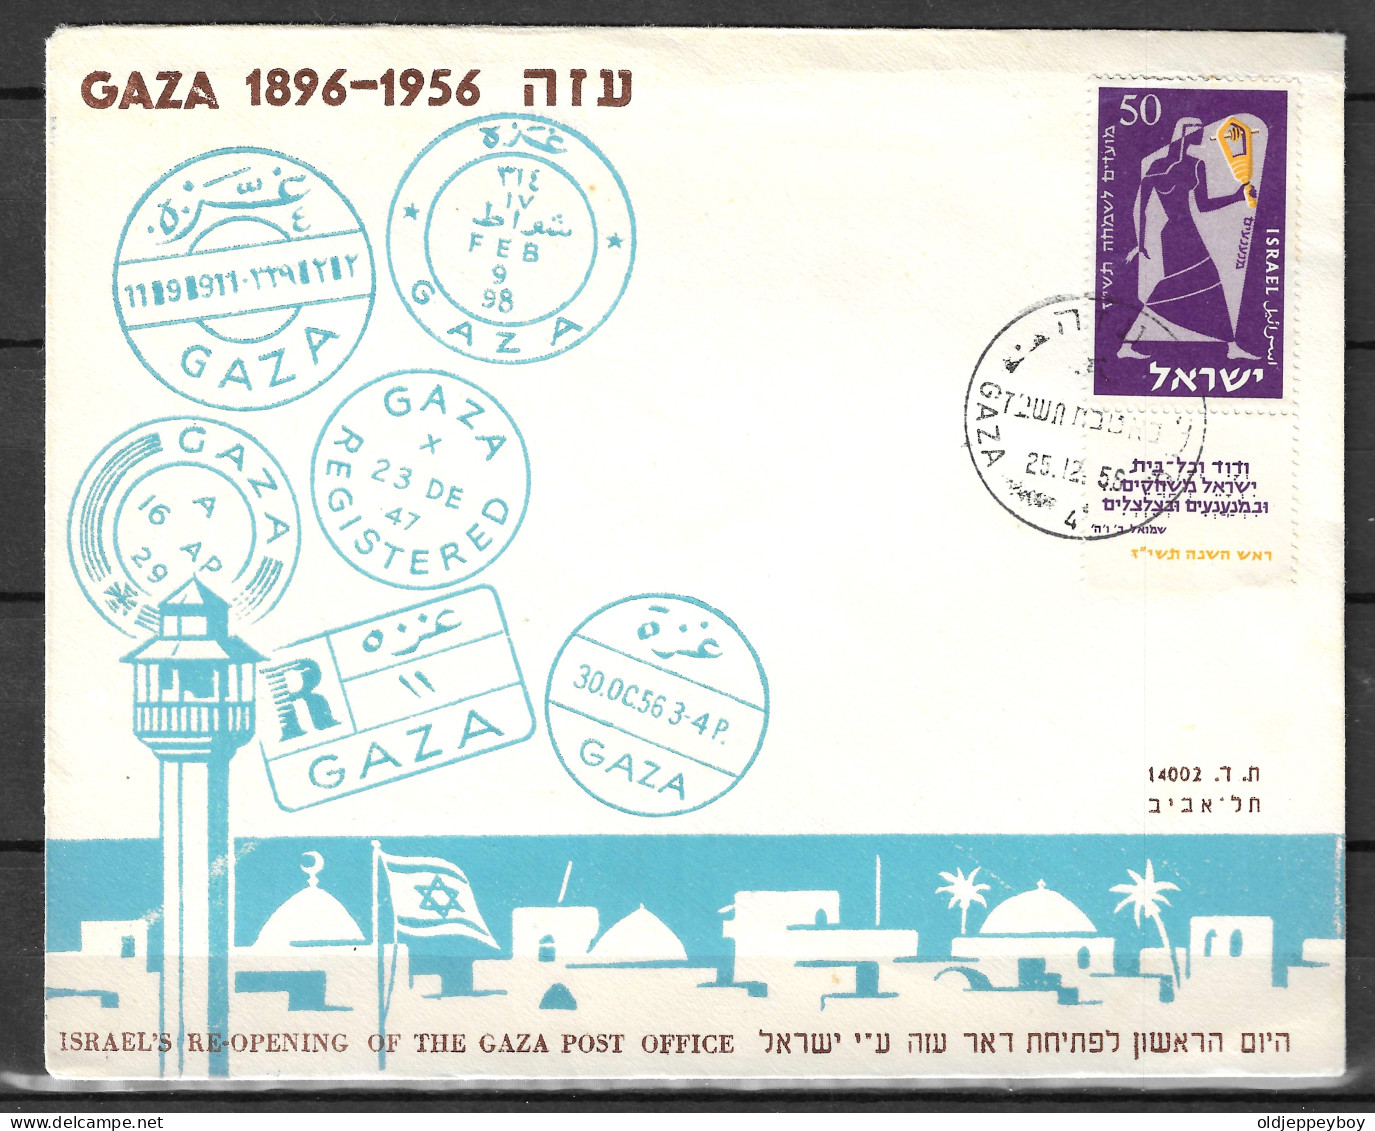 1956 POO FIRST DAY POST OFFICE OPENING PALESTINE GAZA STRIP MAIL STAMP ENVELOPE ISRAEL JUDAICA CACHET COVER - Cartas & Documentos